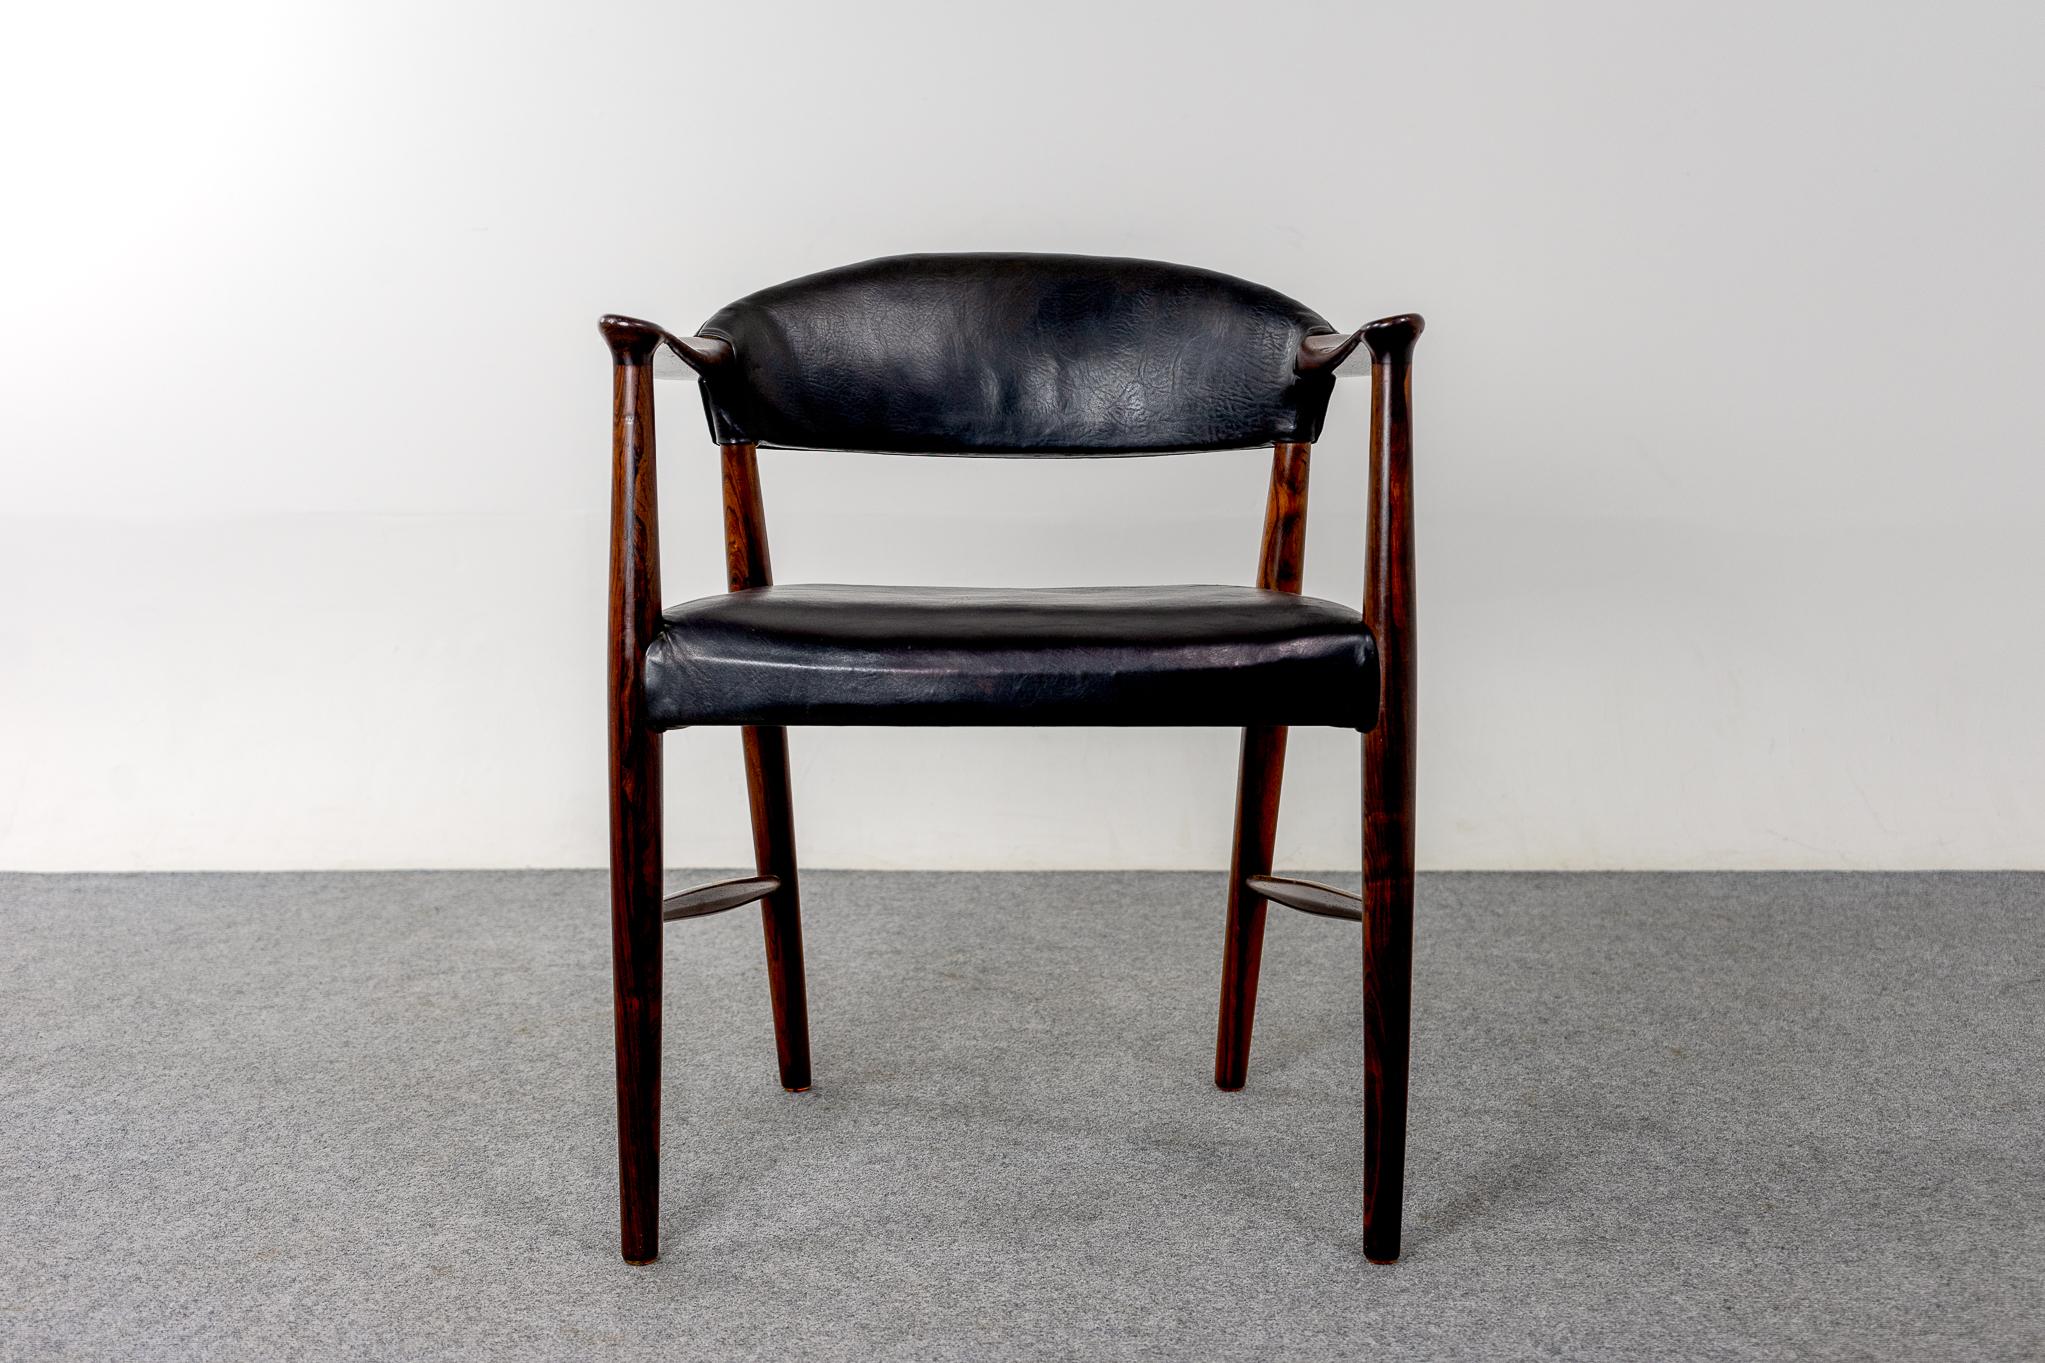 Rosewood and leather Danish armchair by Kurt Olsen, circa 1960's. Sturdy solid wood frame with stunning grain patterning on the sculpted frame. Comfort without an imposing footprint! 

Please inquire for remote and international shipping.